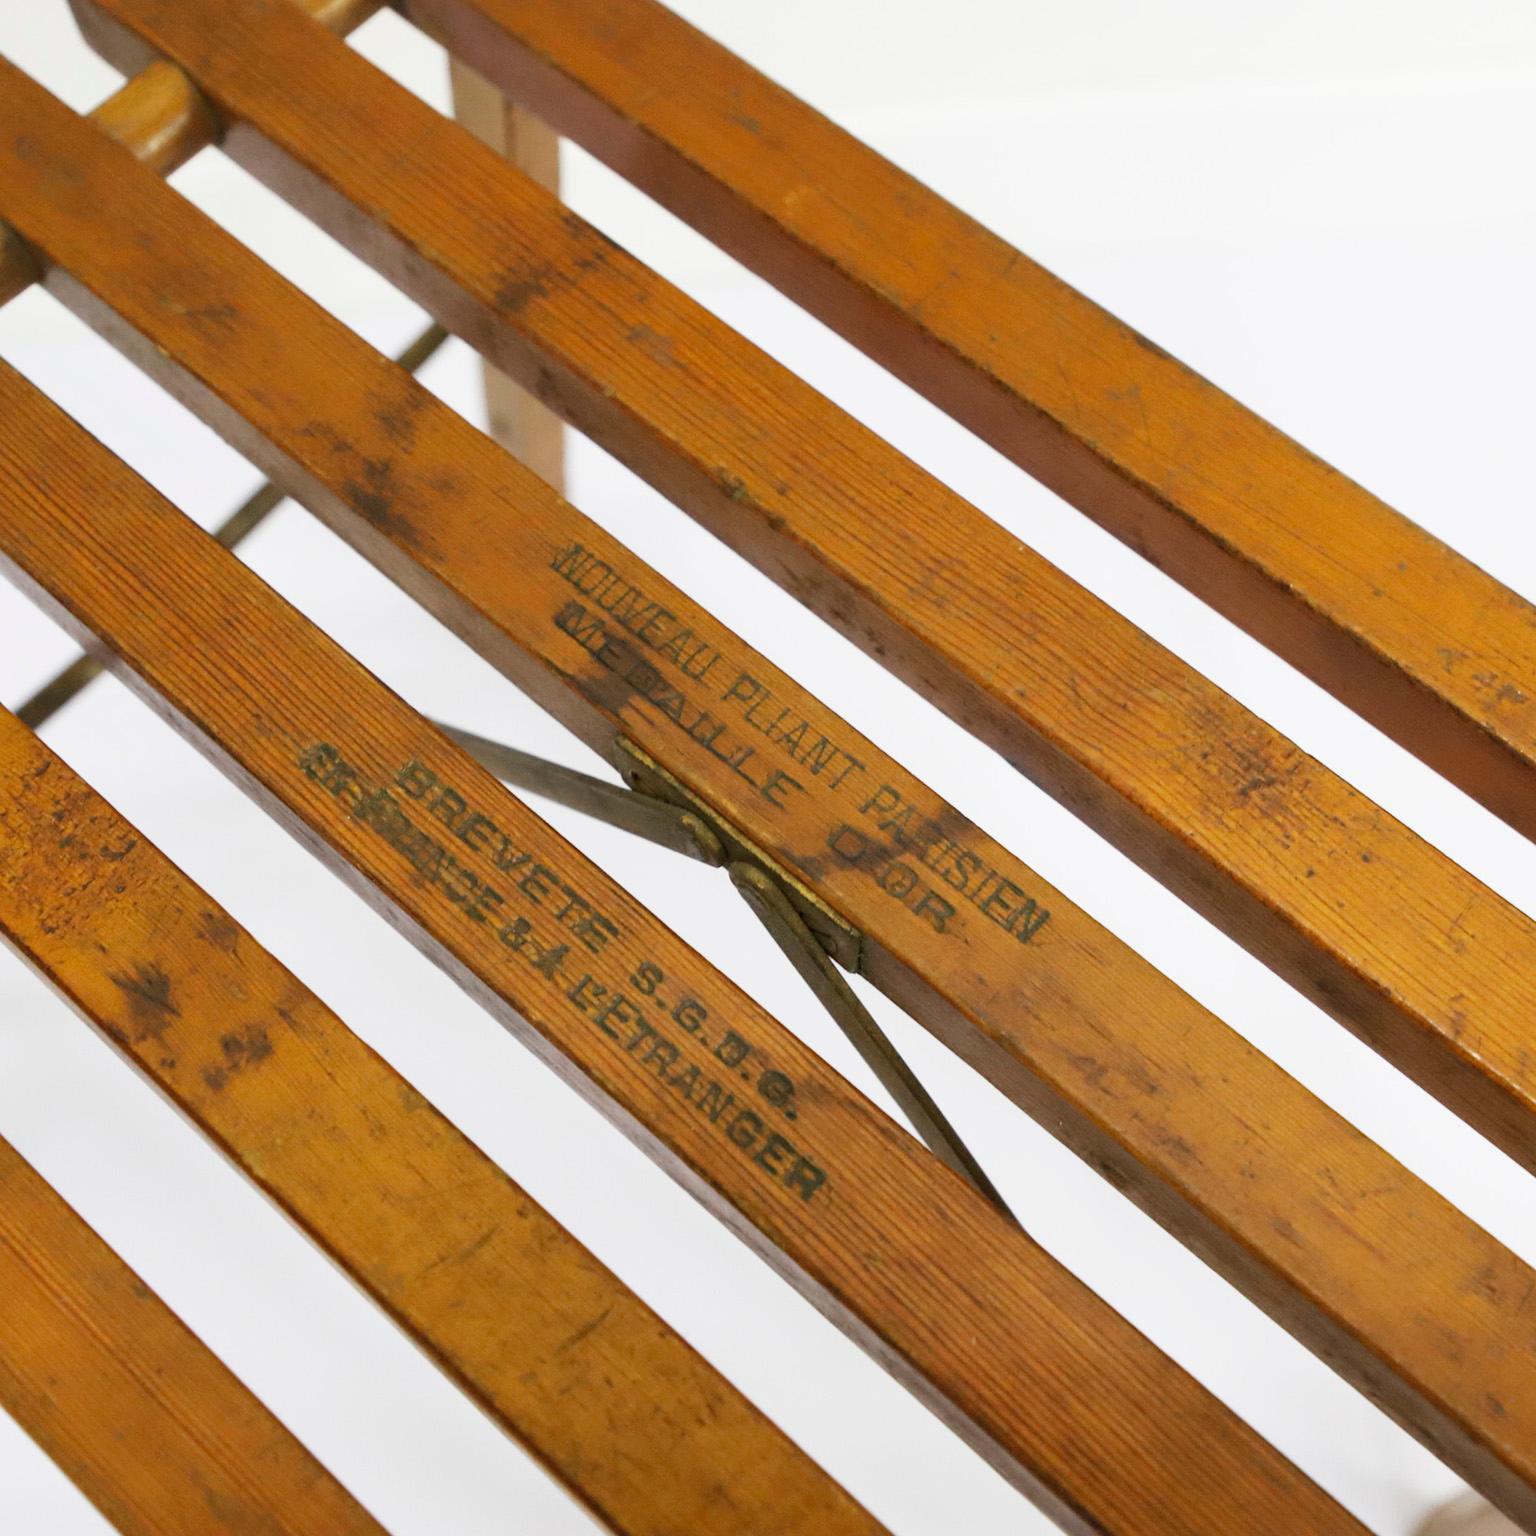 Folding Parisian stool, circa 1920, made in wooden slats marked “Nouveau Pliant Parisien Medaille DÓR” Brevete S.G.D.G. en France & Al,stranger” New folding Parisian, gold medal, patented SGDG France and abroad, small iron handle for transport.